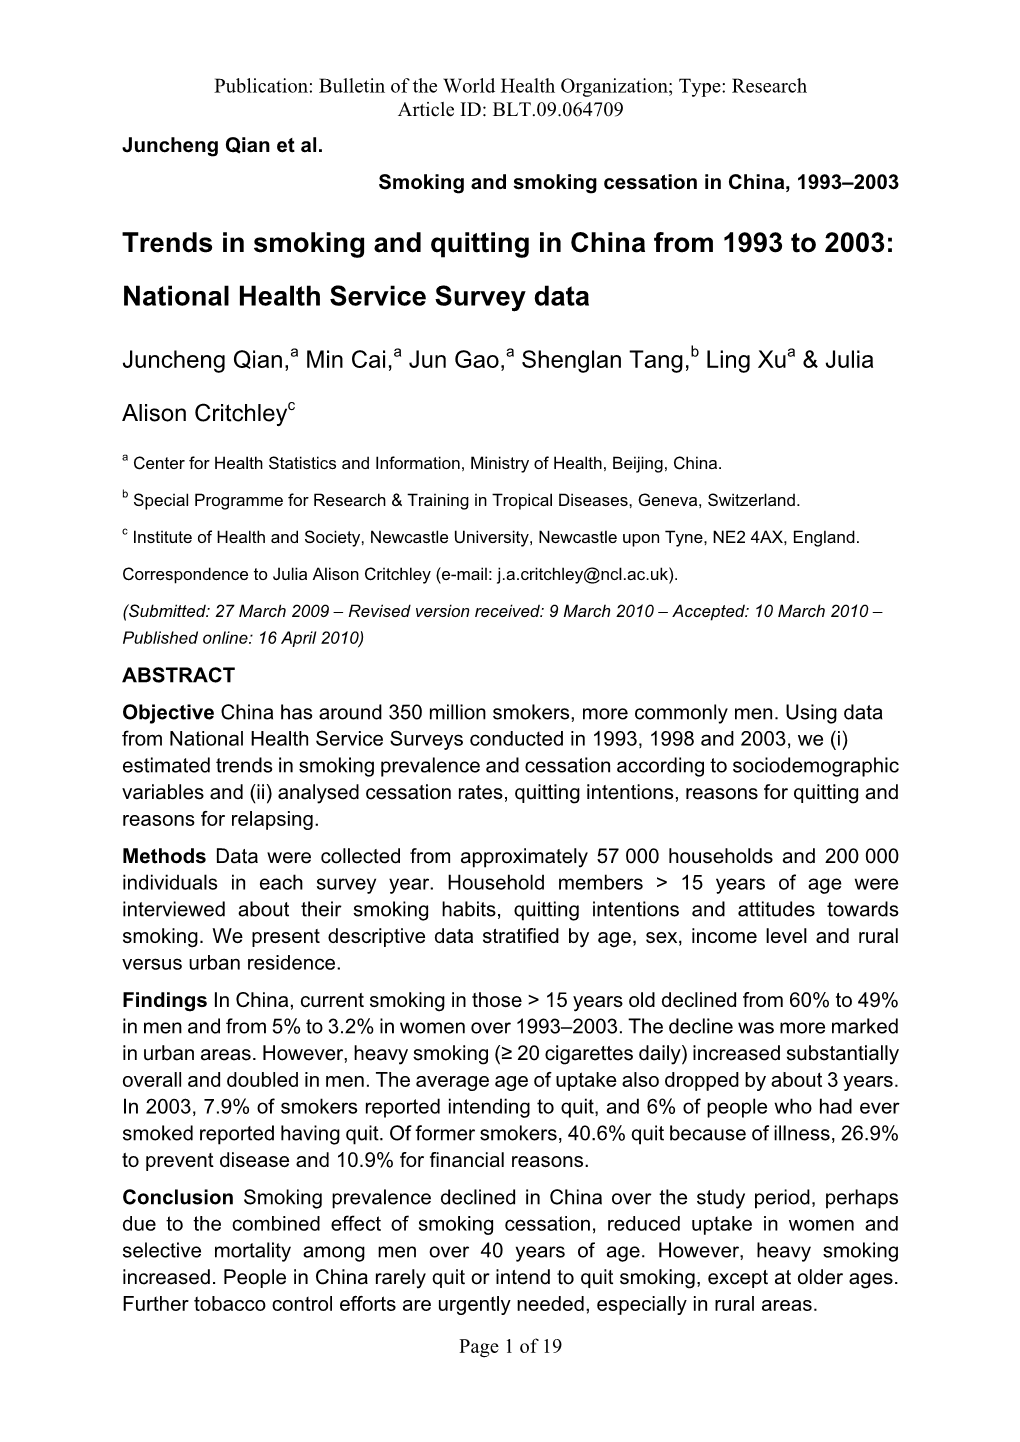 Trends in Smoking and Quitting in China from 1993 to 2003: National Health Service Survey Data